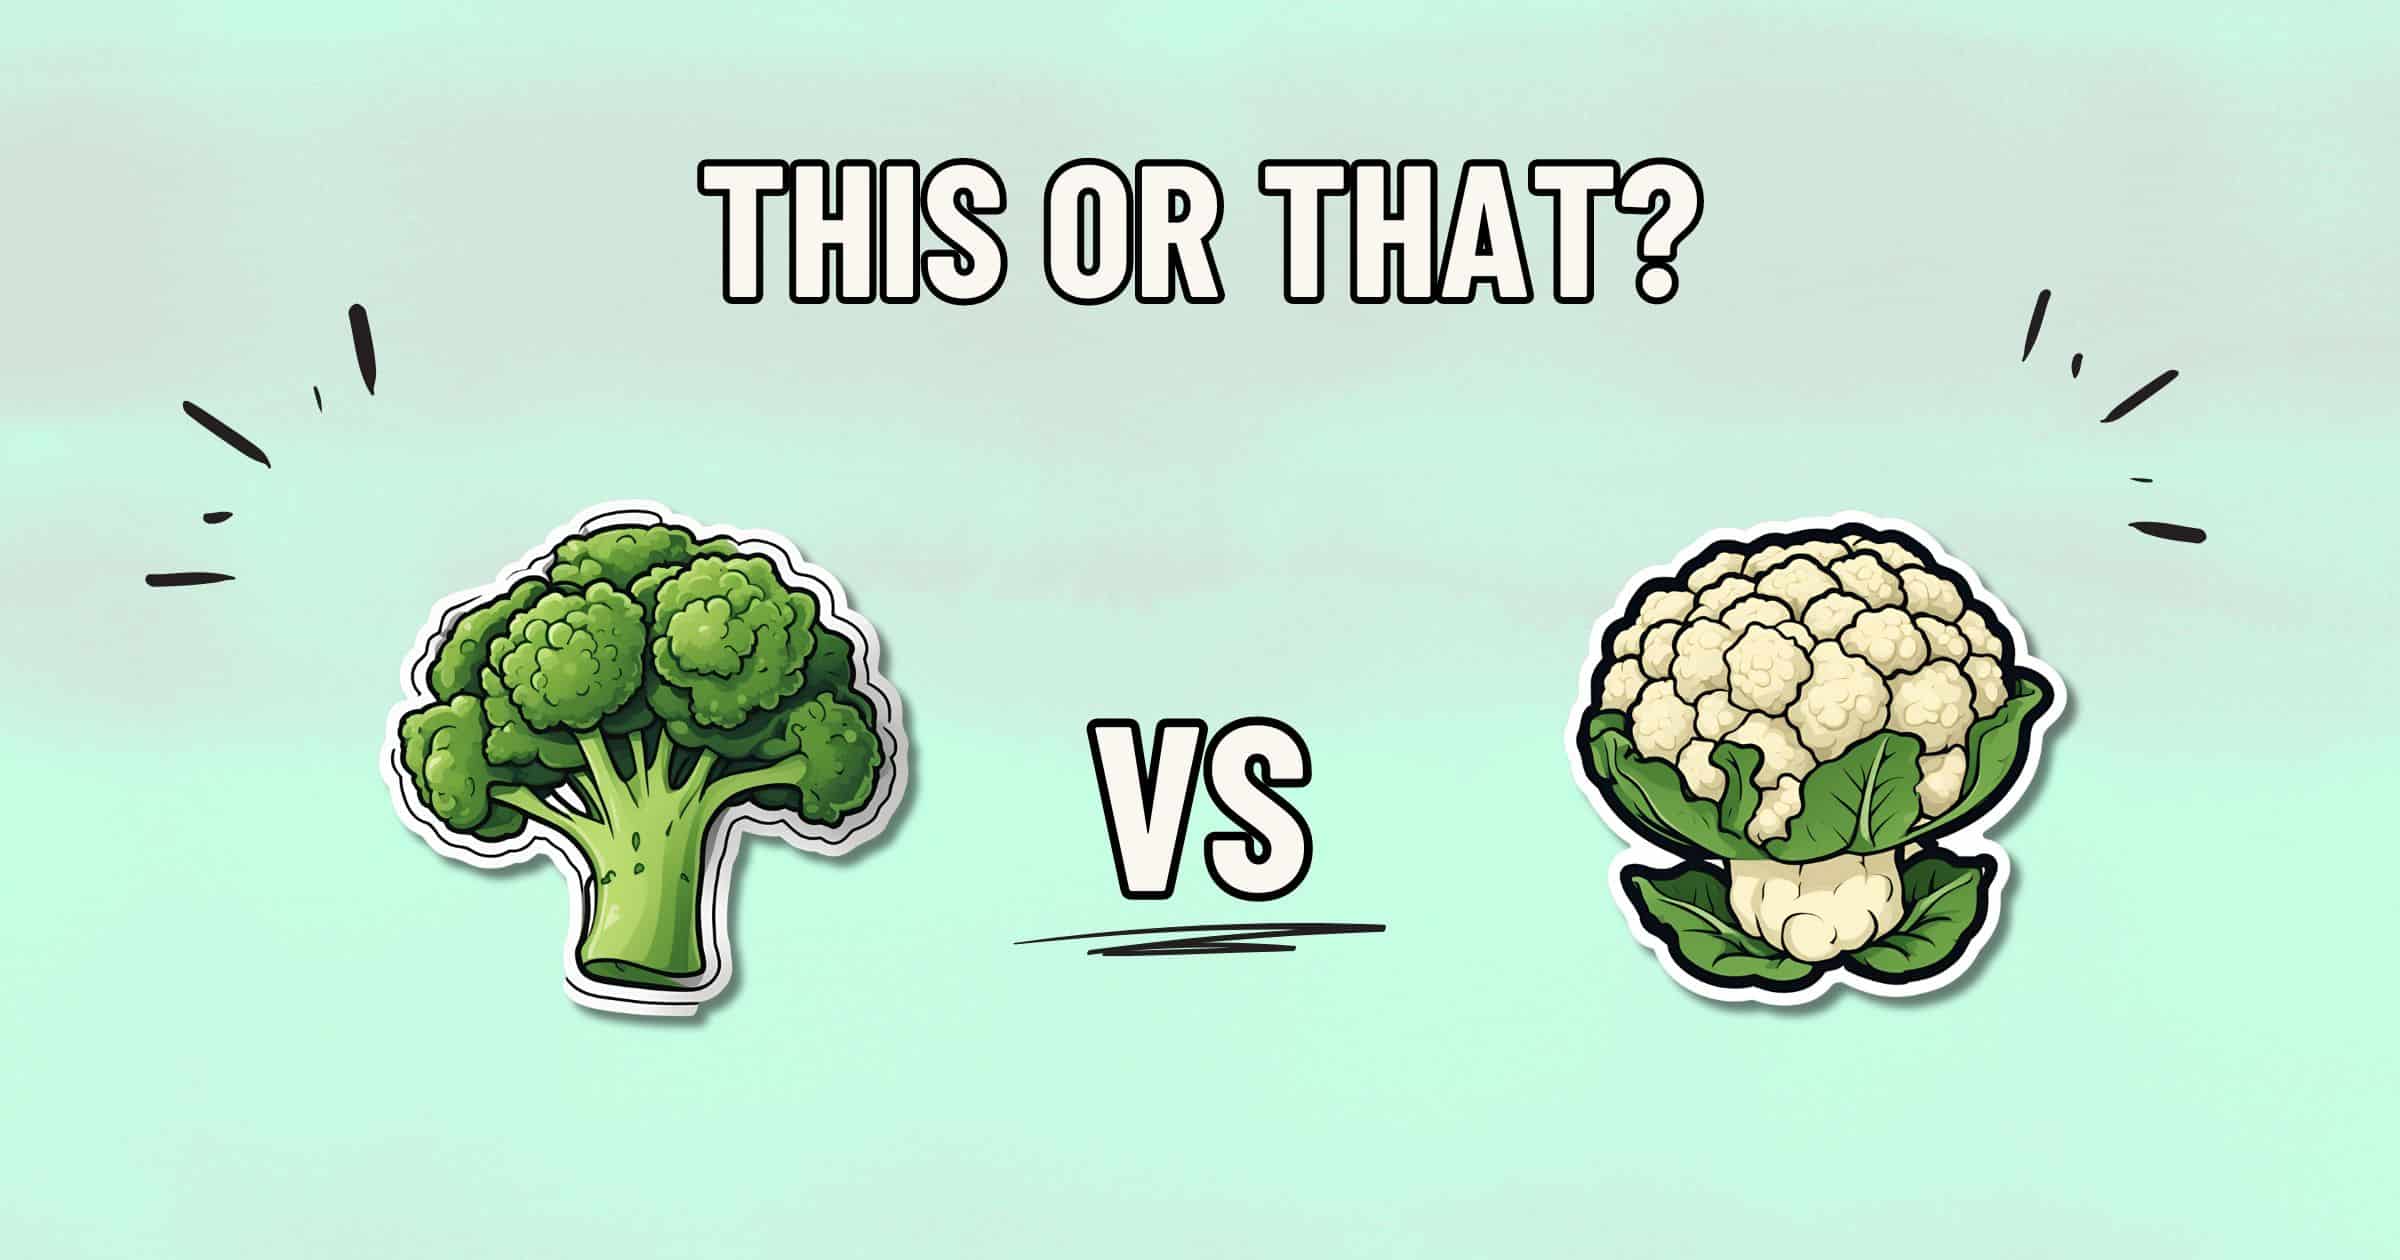 A stylized illustration shows a choice between broccoli and cauliflower. The broccoli is depicted on the left, and the cauliflower on the right, with "This or That?" displayed at the top and "VS" between these healthier vegetables.